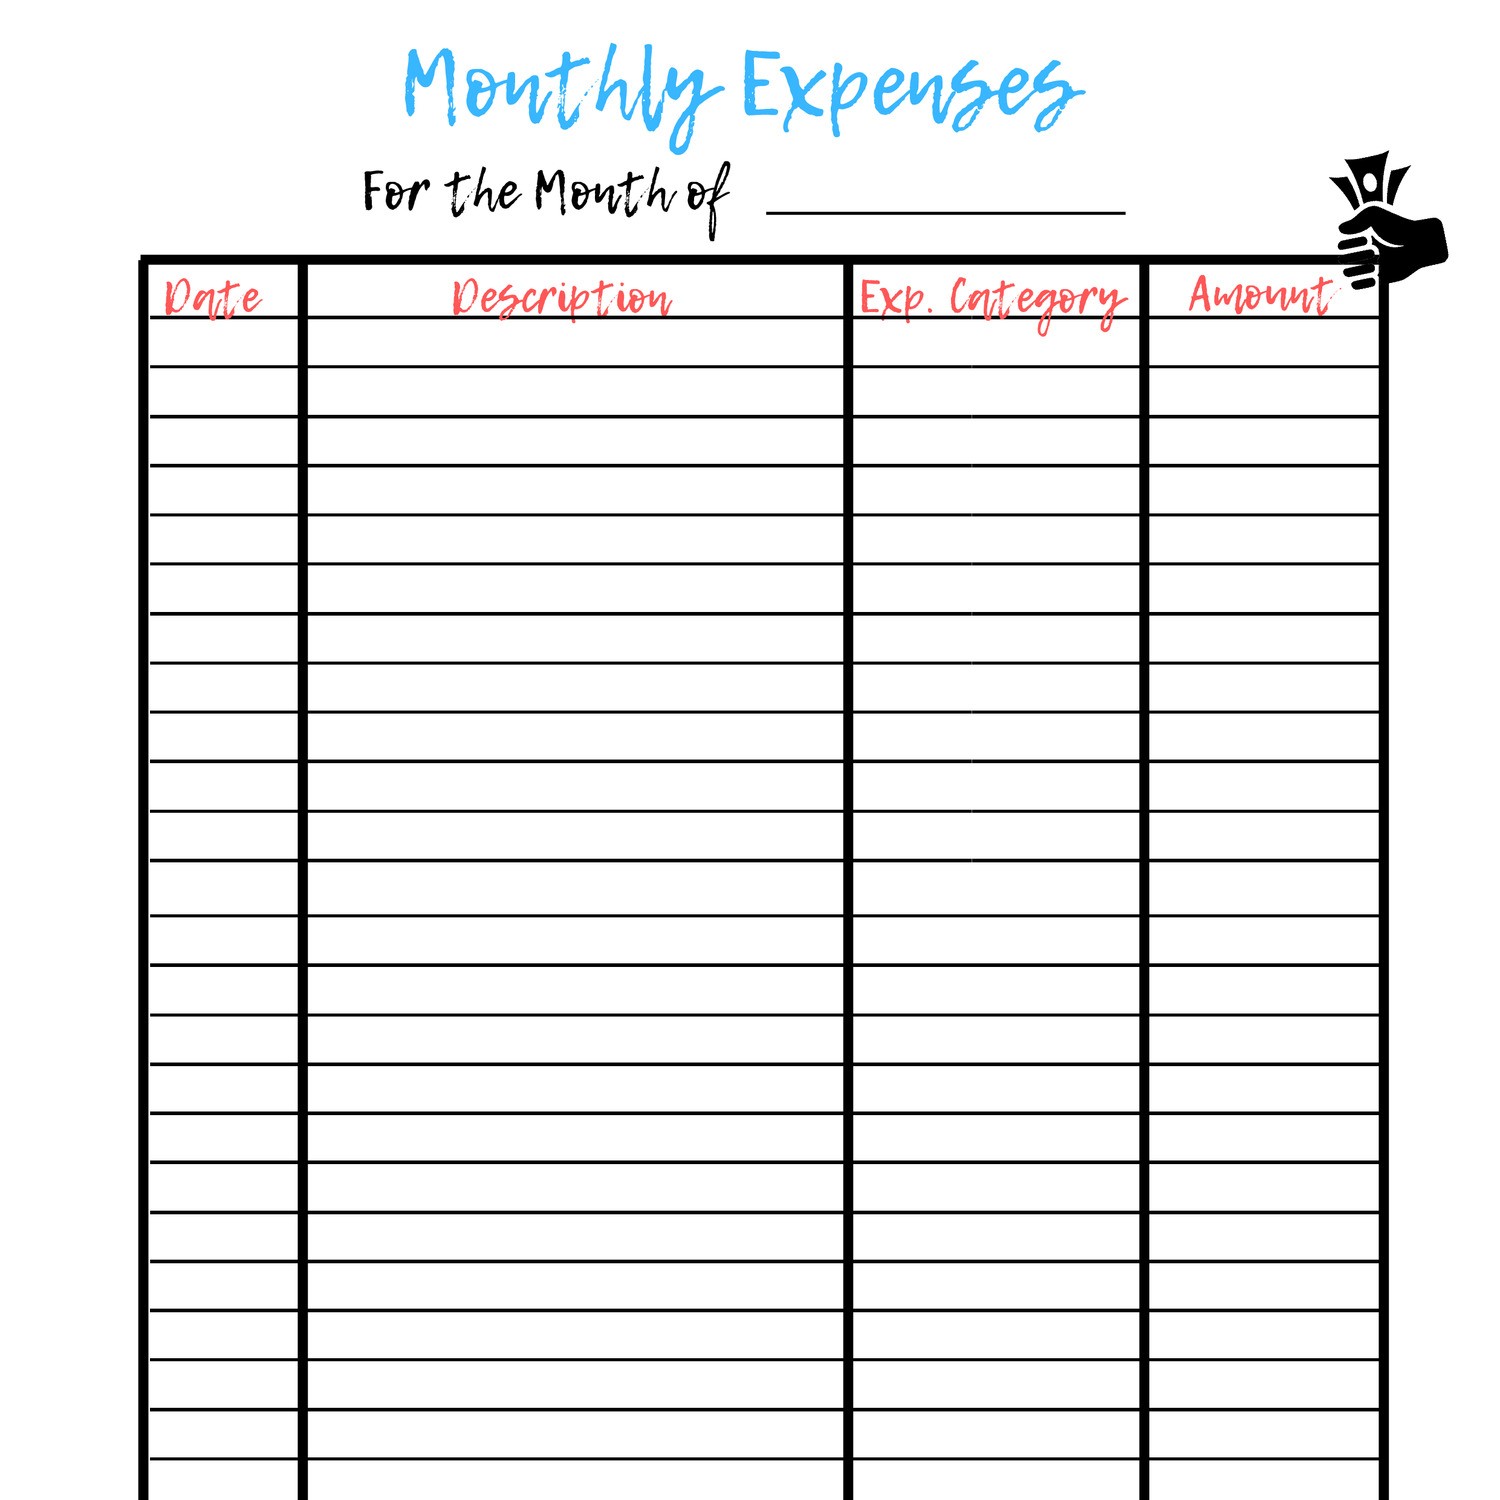 monthly-expense-log-pdf-docdroid